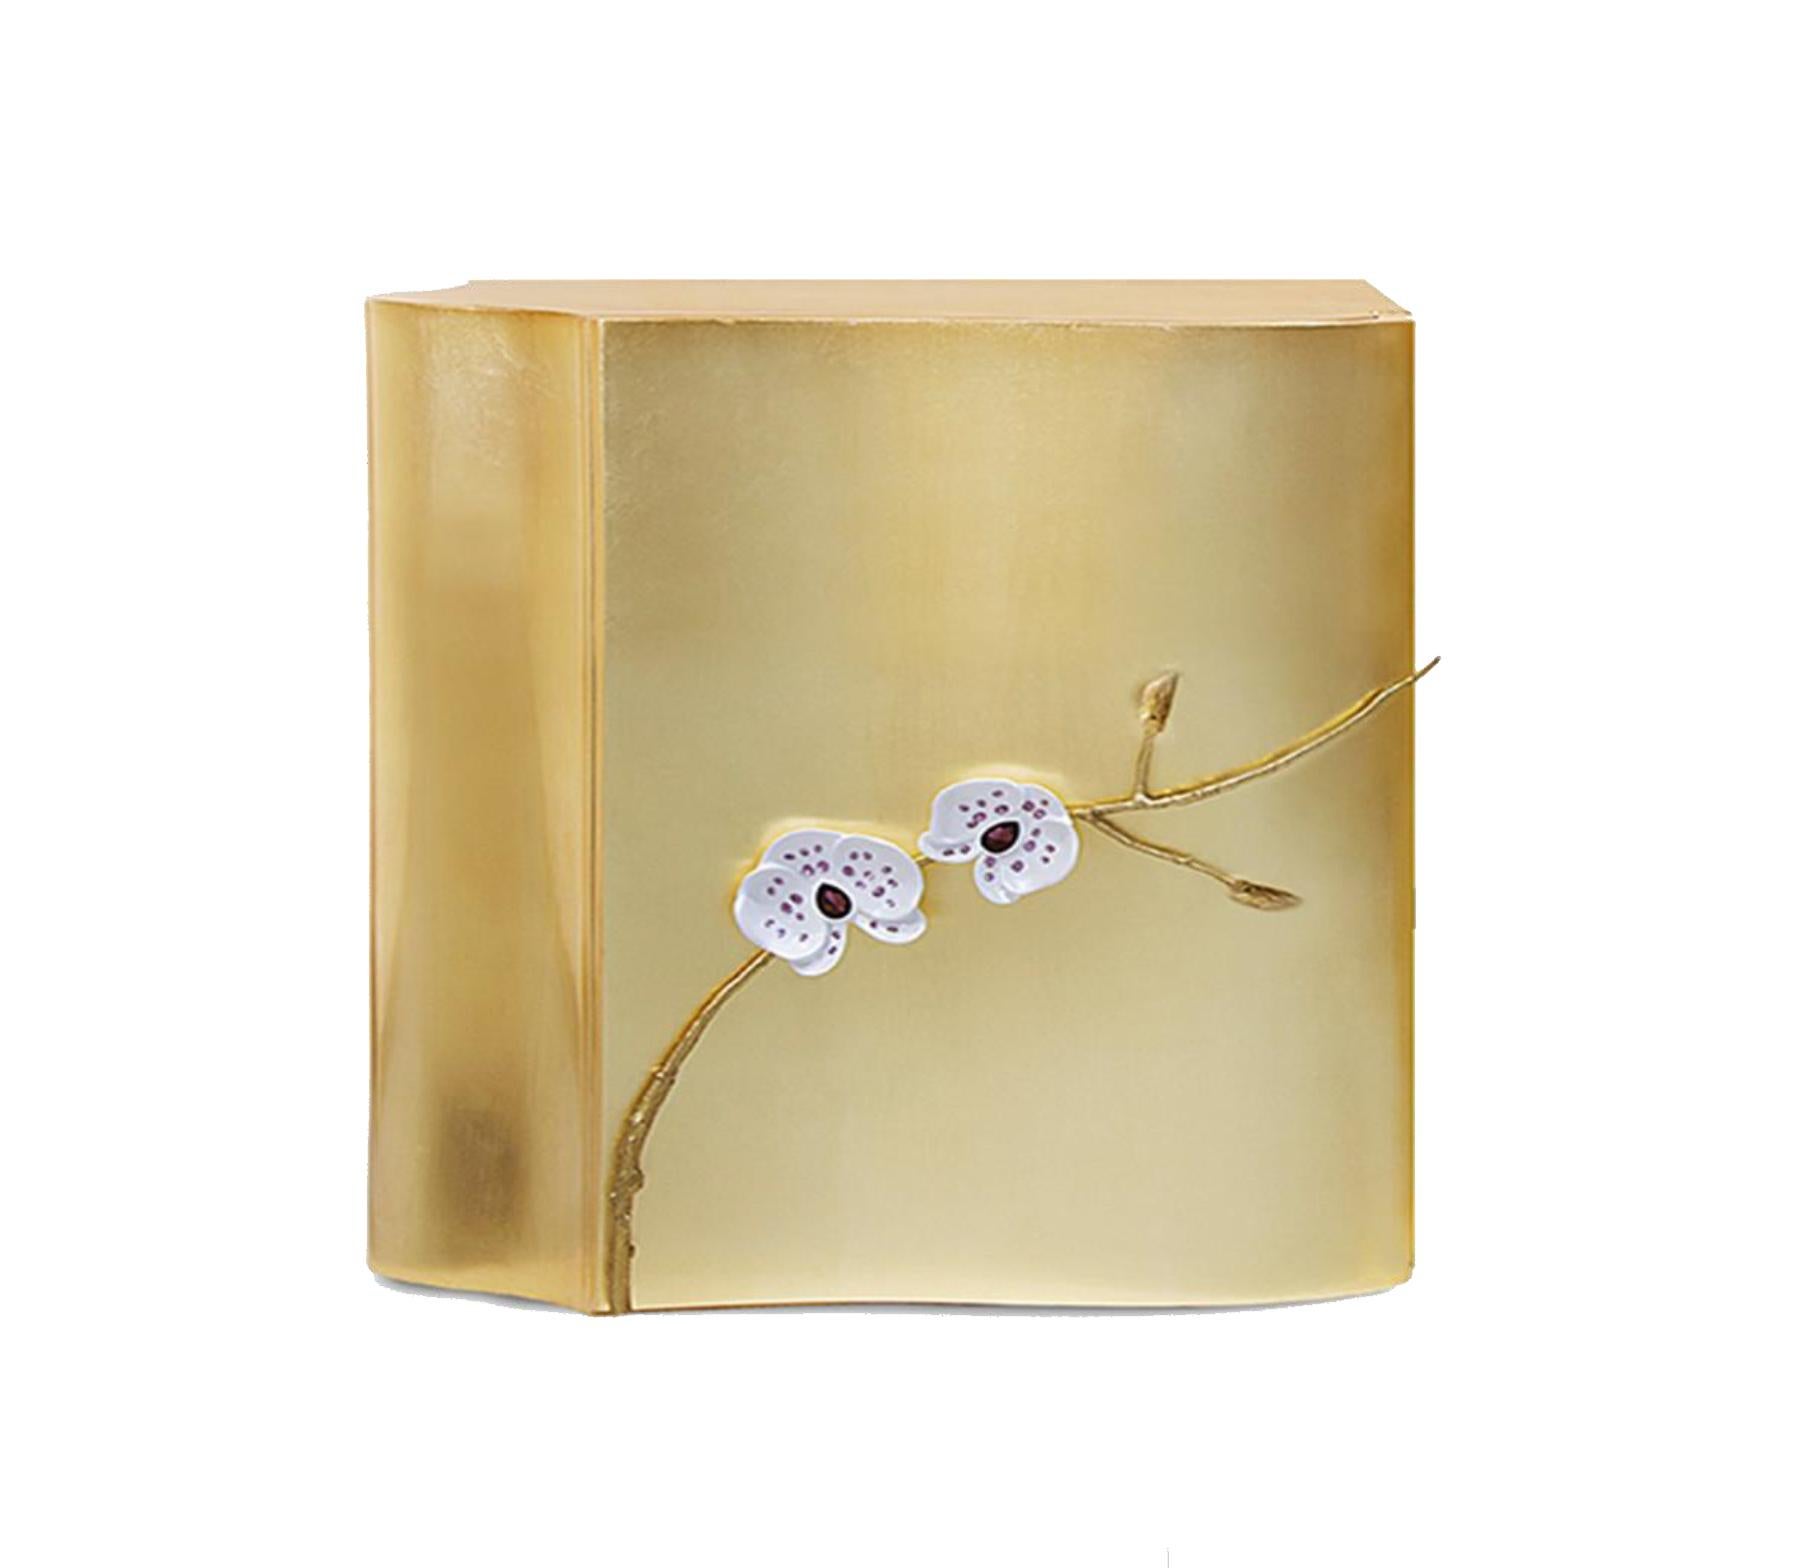 Set Of 2 Honor Bedside Table by Memoir Essence
Dimensions: D 50 x W 60 x H 55 cm.
Materials: Gold leaf, Swarovski crystals and iron wood veneer.

Also available with a lacquered interior. Please contact us.

Inspired in high jewelry Honor is